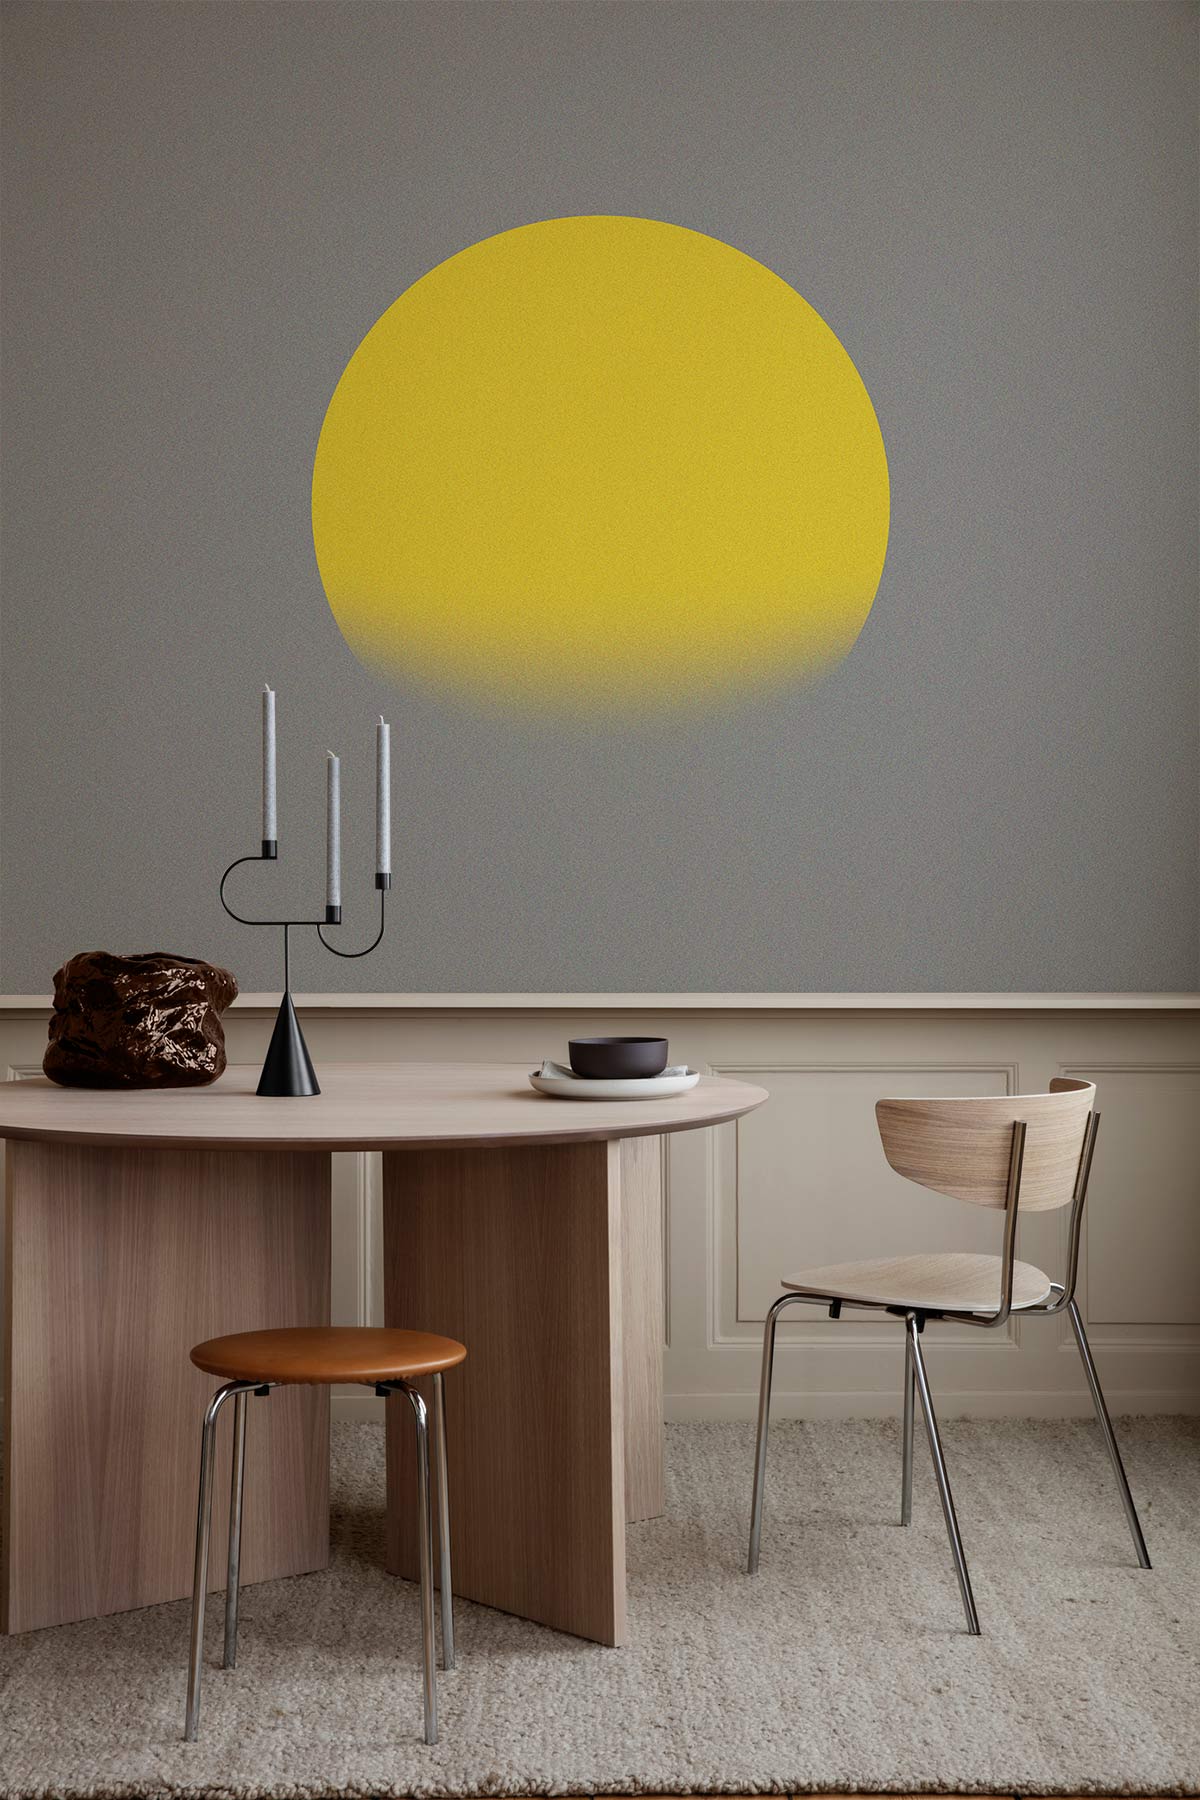 Yellow circle pattern Wallpaper mural for dining Room